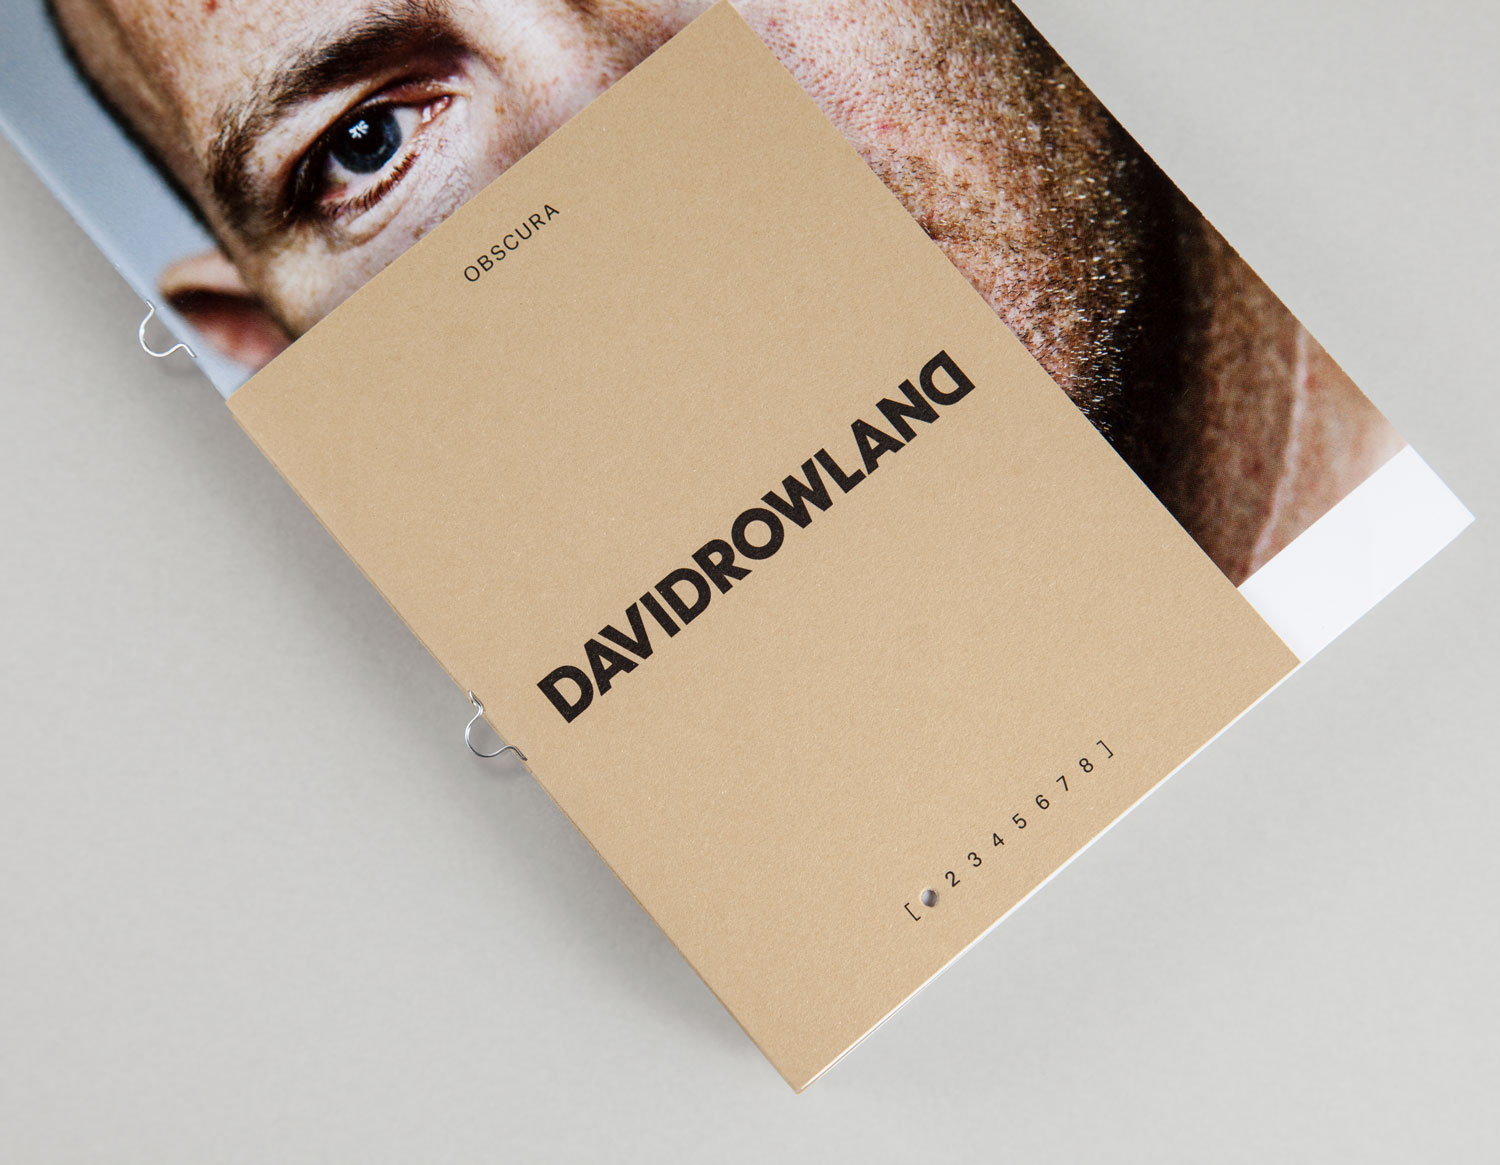 Brand identity and lookbook by London-based graphic design studio ico Design for photographer David Rowland